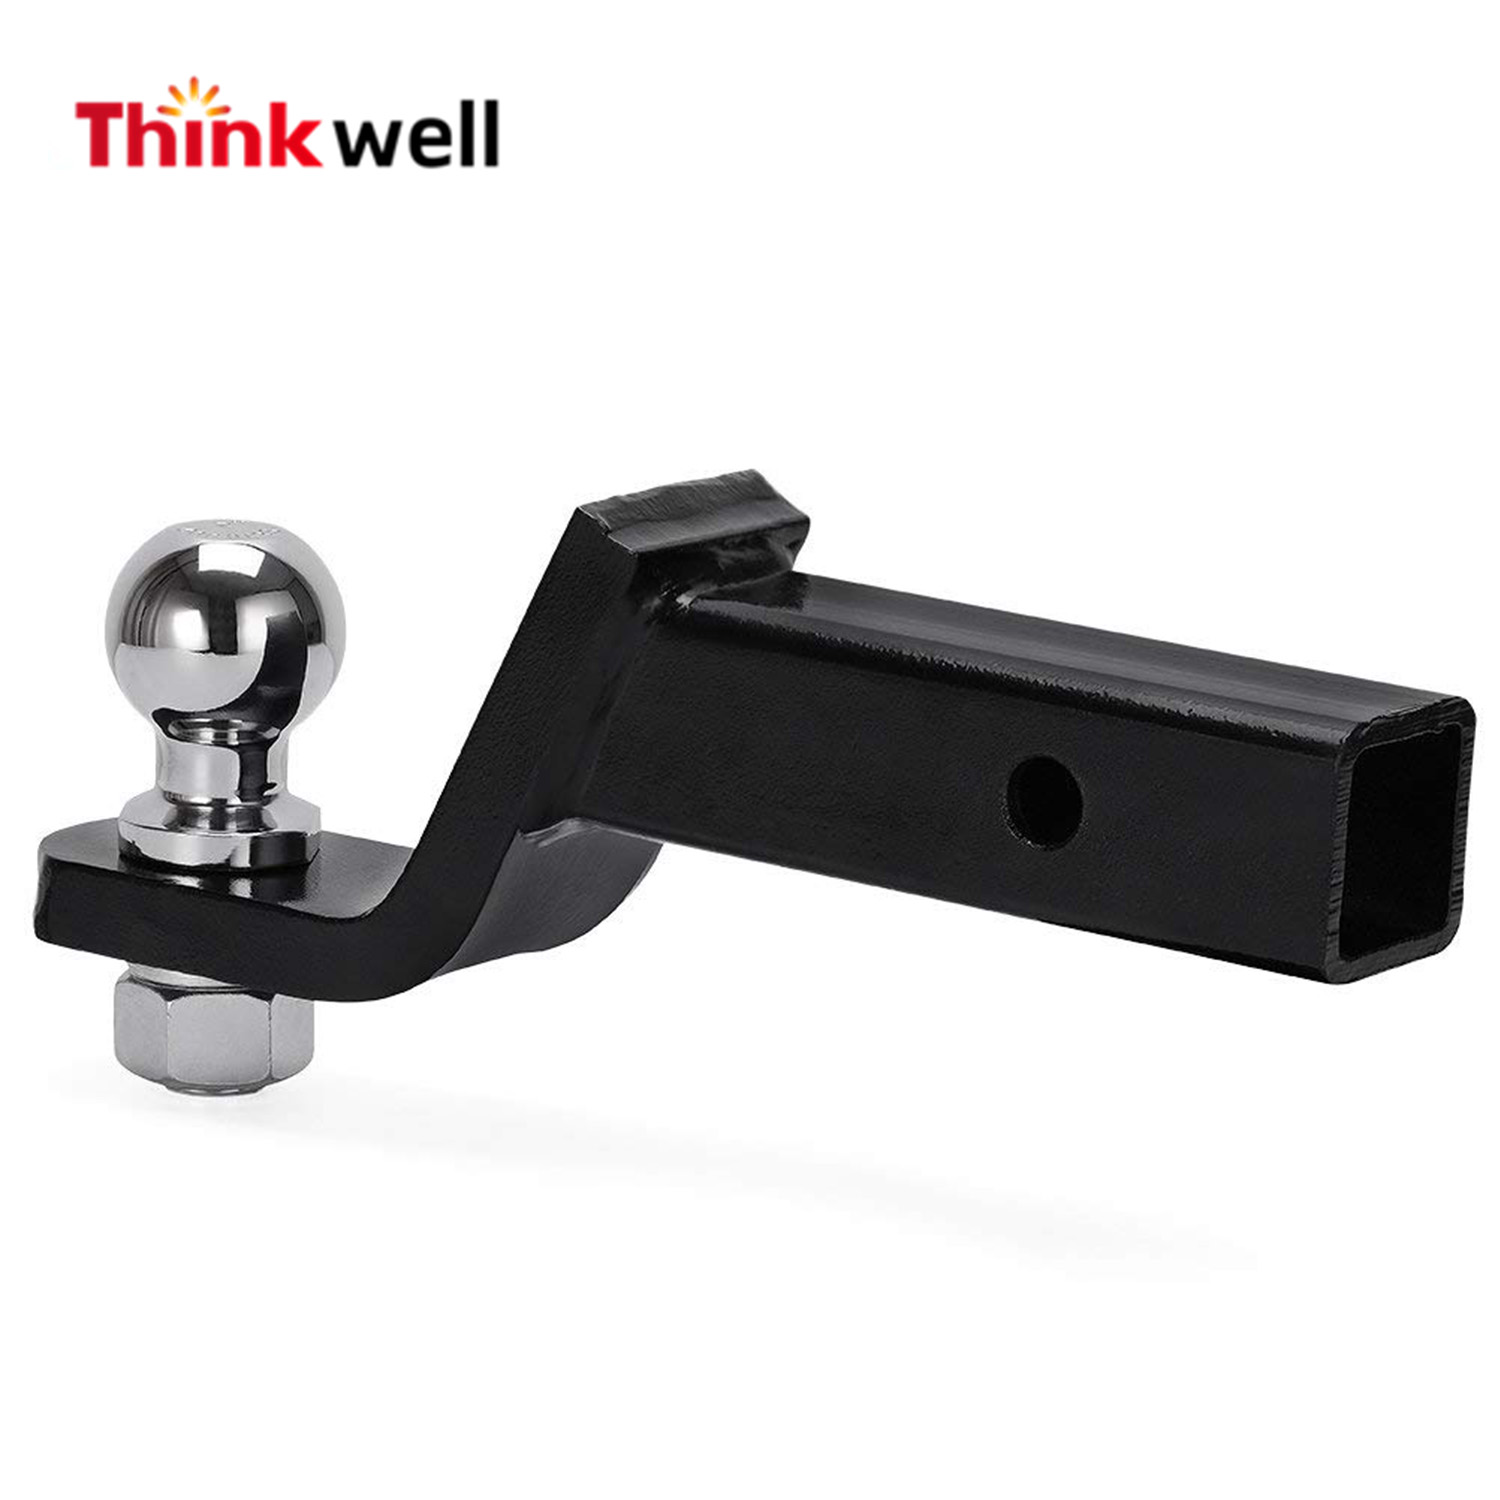 Drop 2" Tow Ball Mount With Trailer Hitch Ball